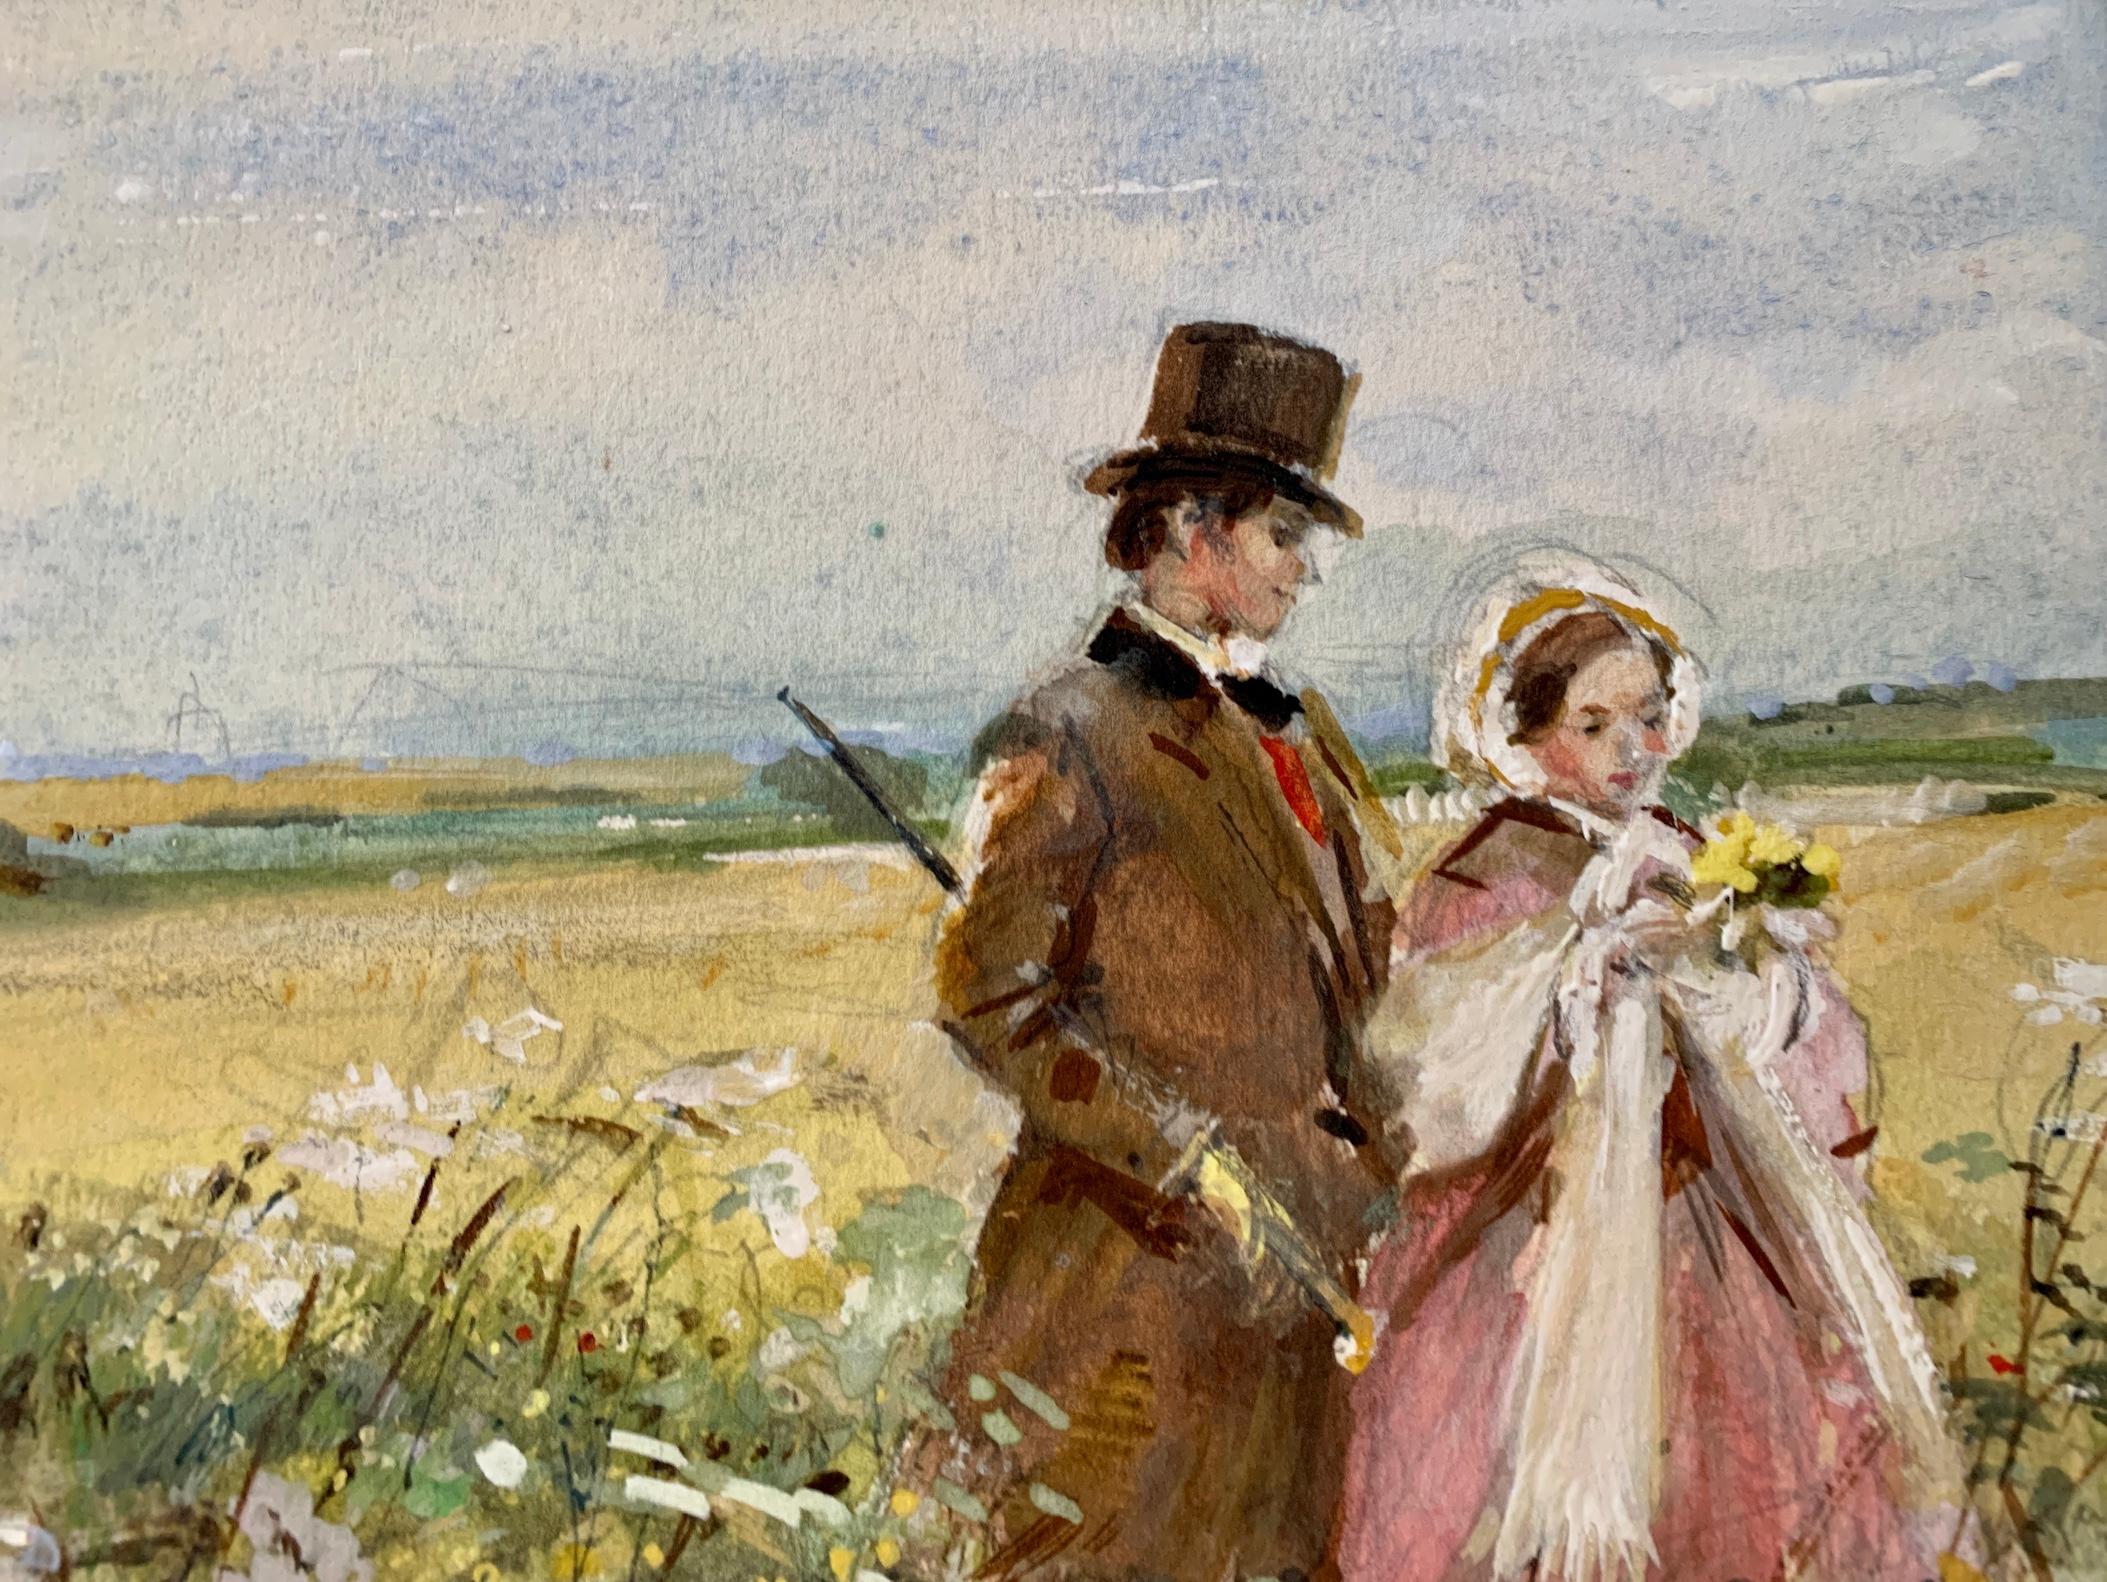 Courtship,  British Couple walking in a landscape in Edwardian dress - Victorian Art by John Strickland Goodall